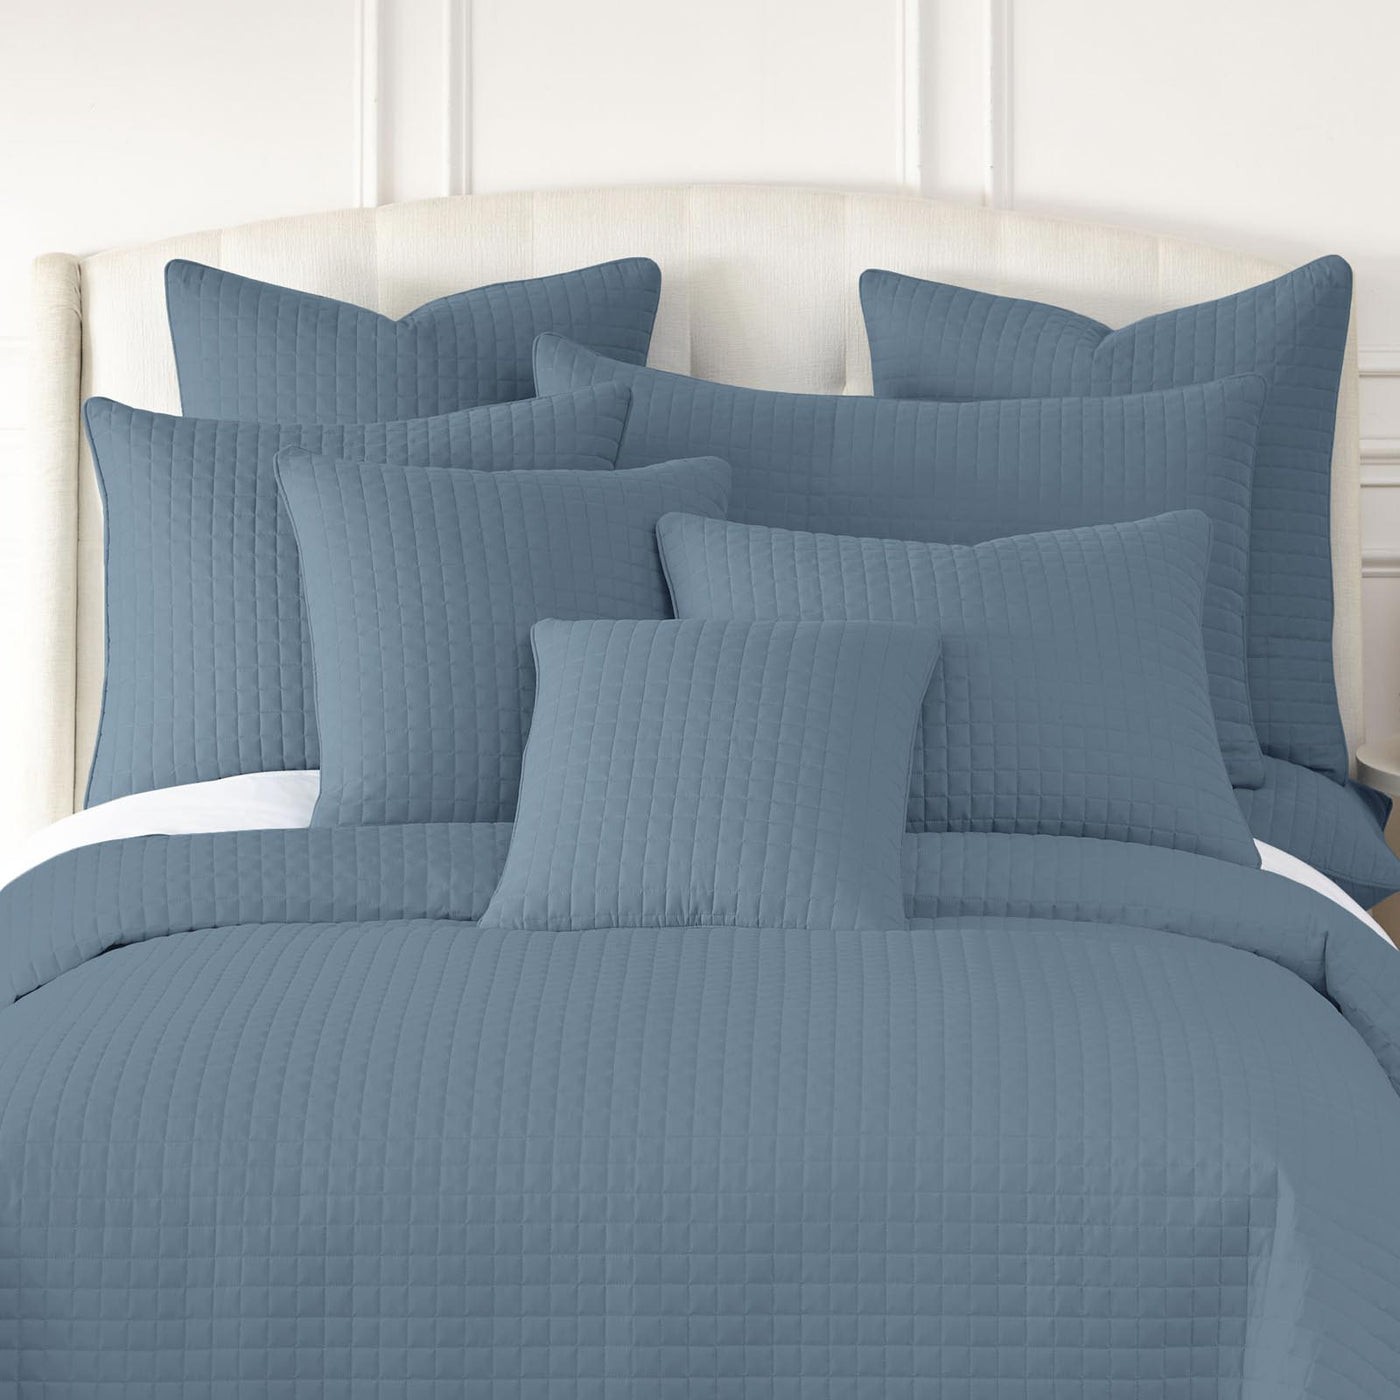 110 GSM Microfiber Qulilted shams in multiple sizes in coronet blue